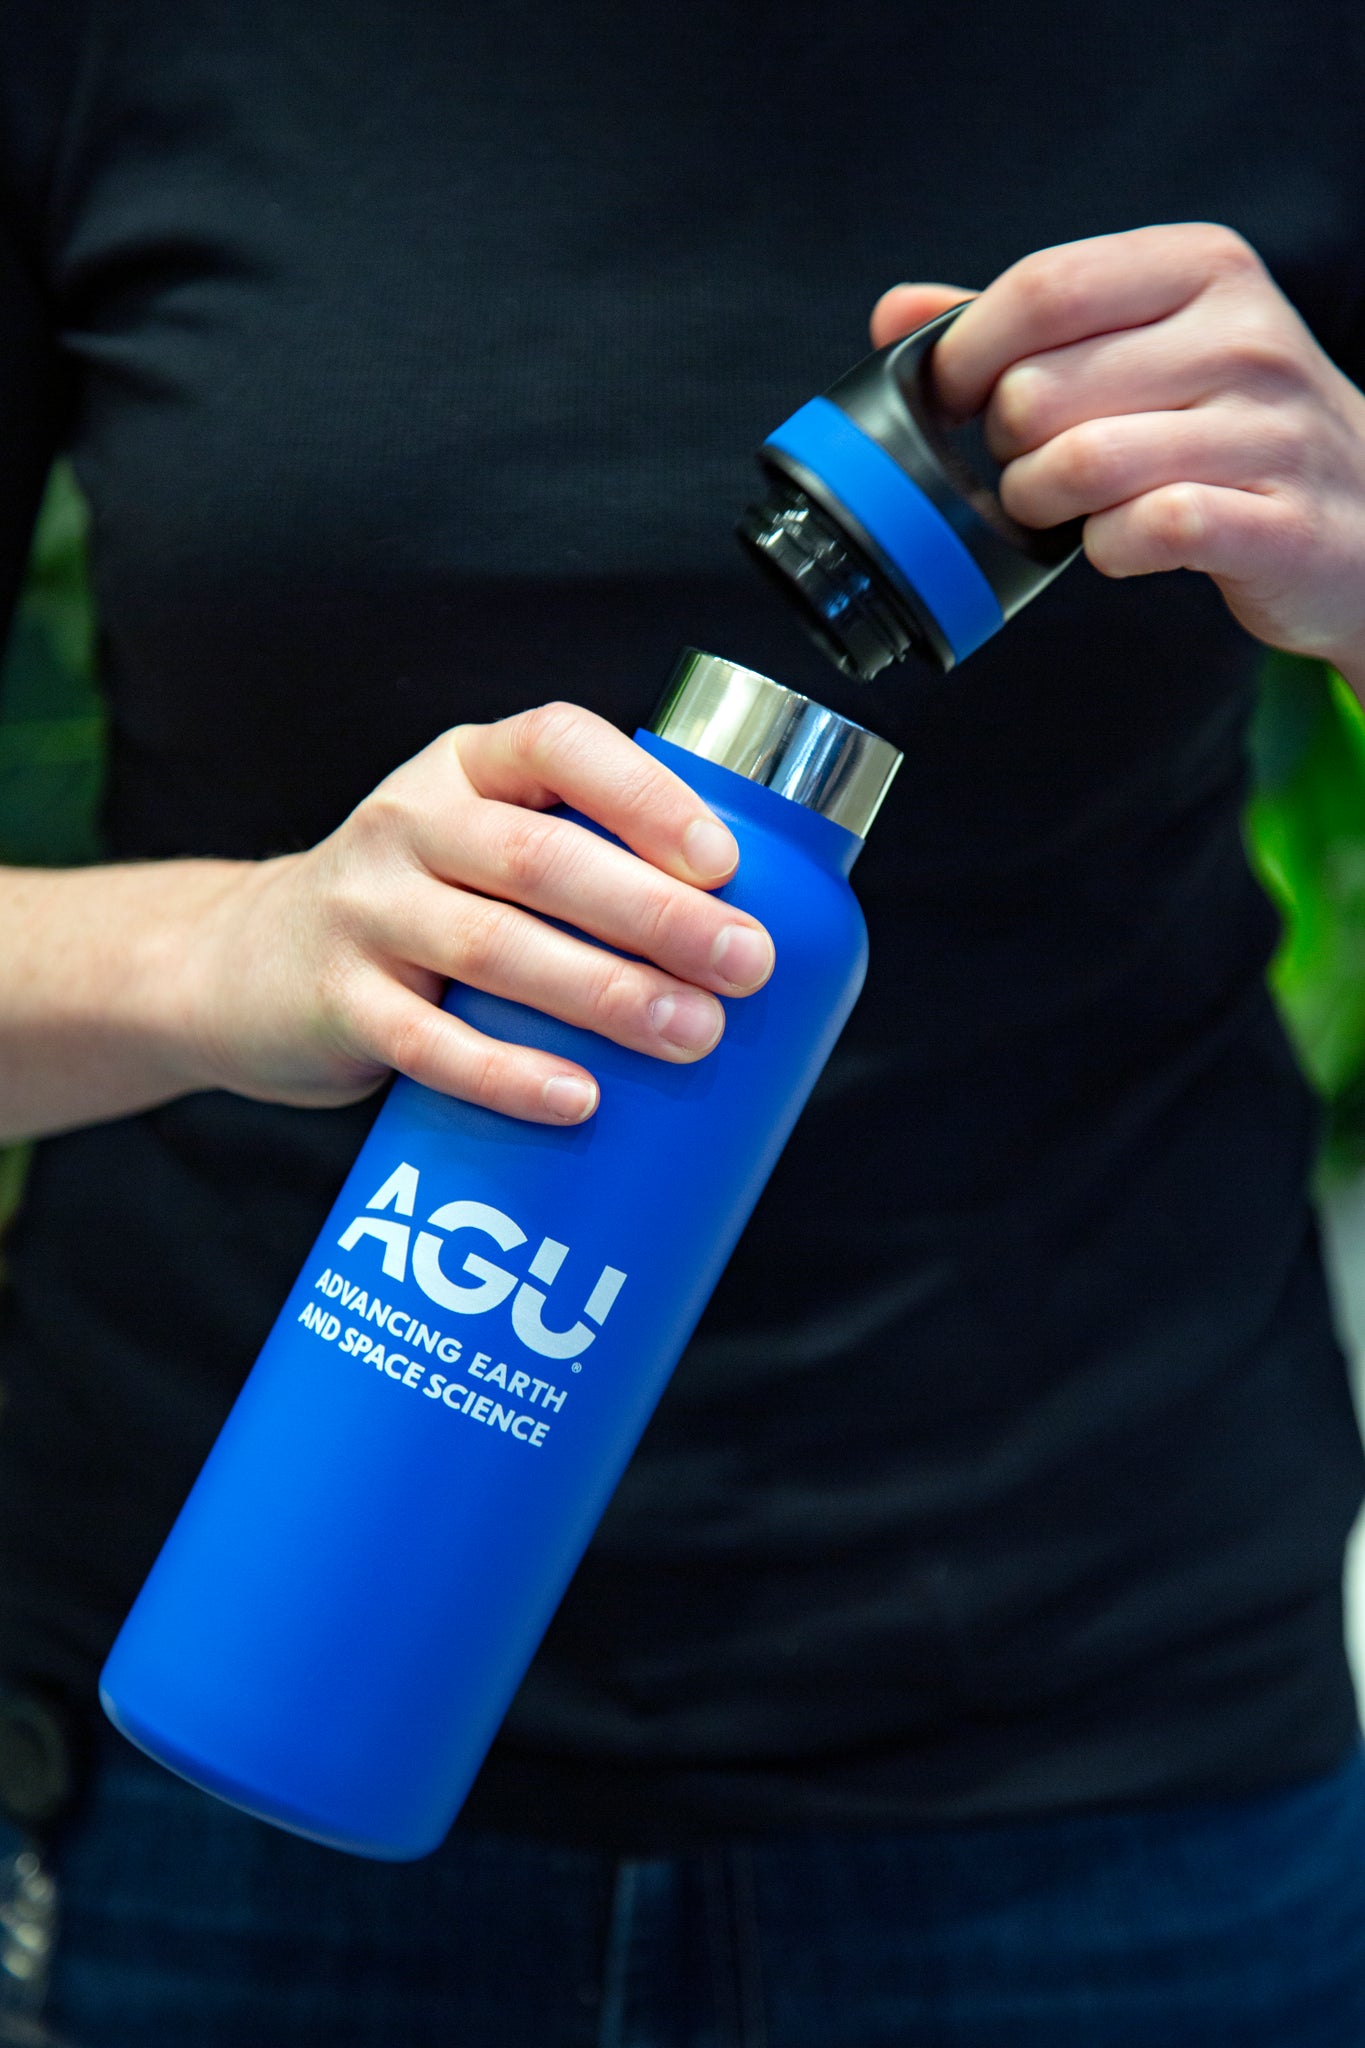 A person holds the AGU water bottle